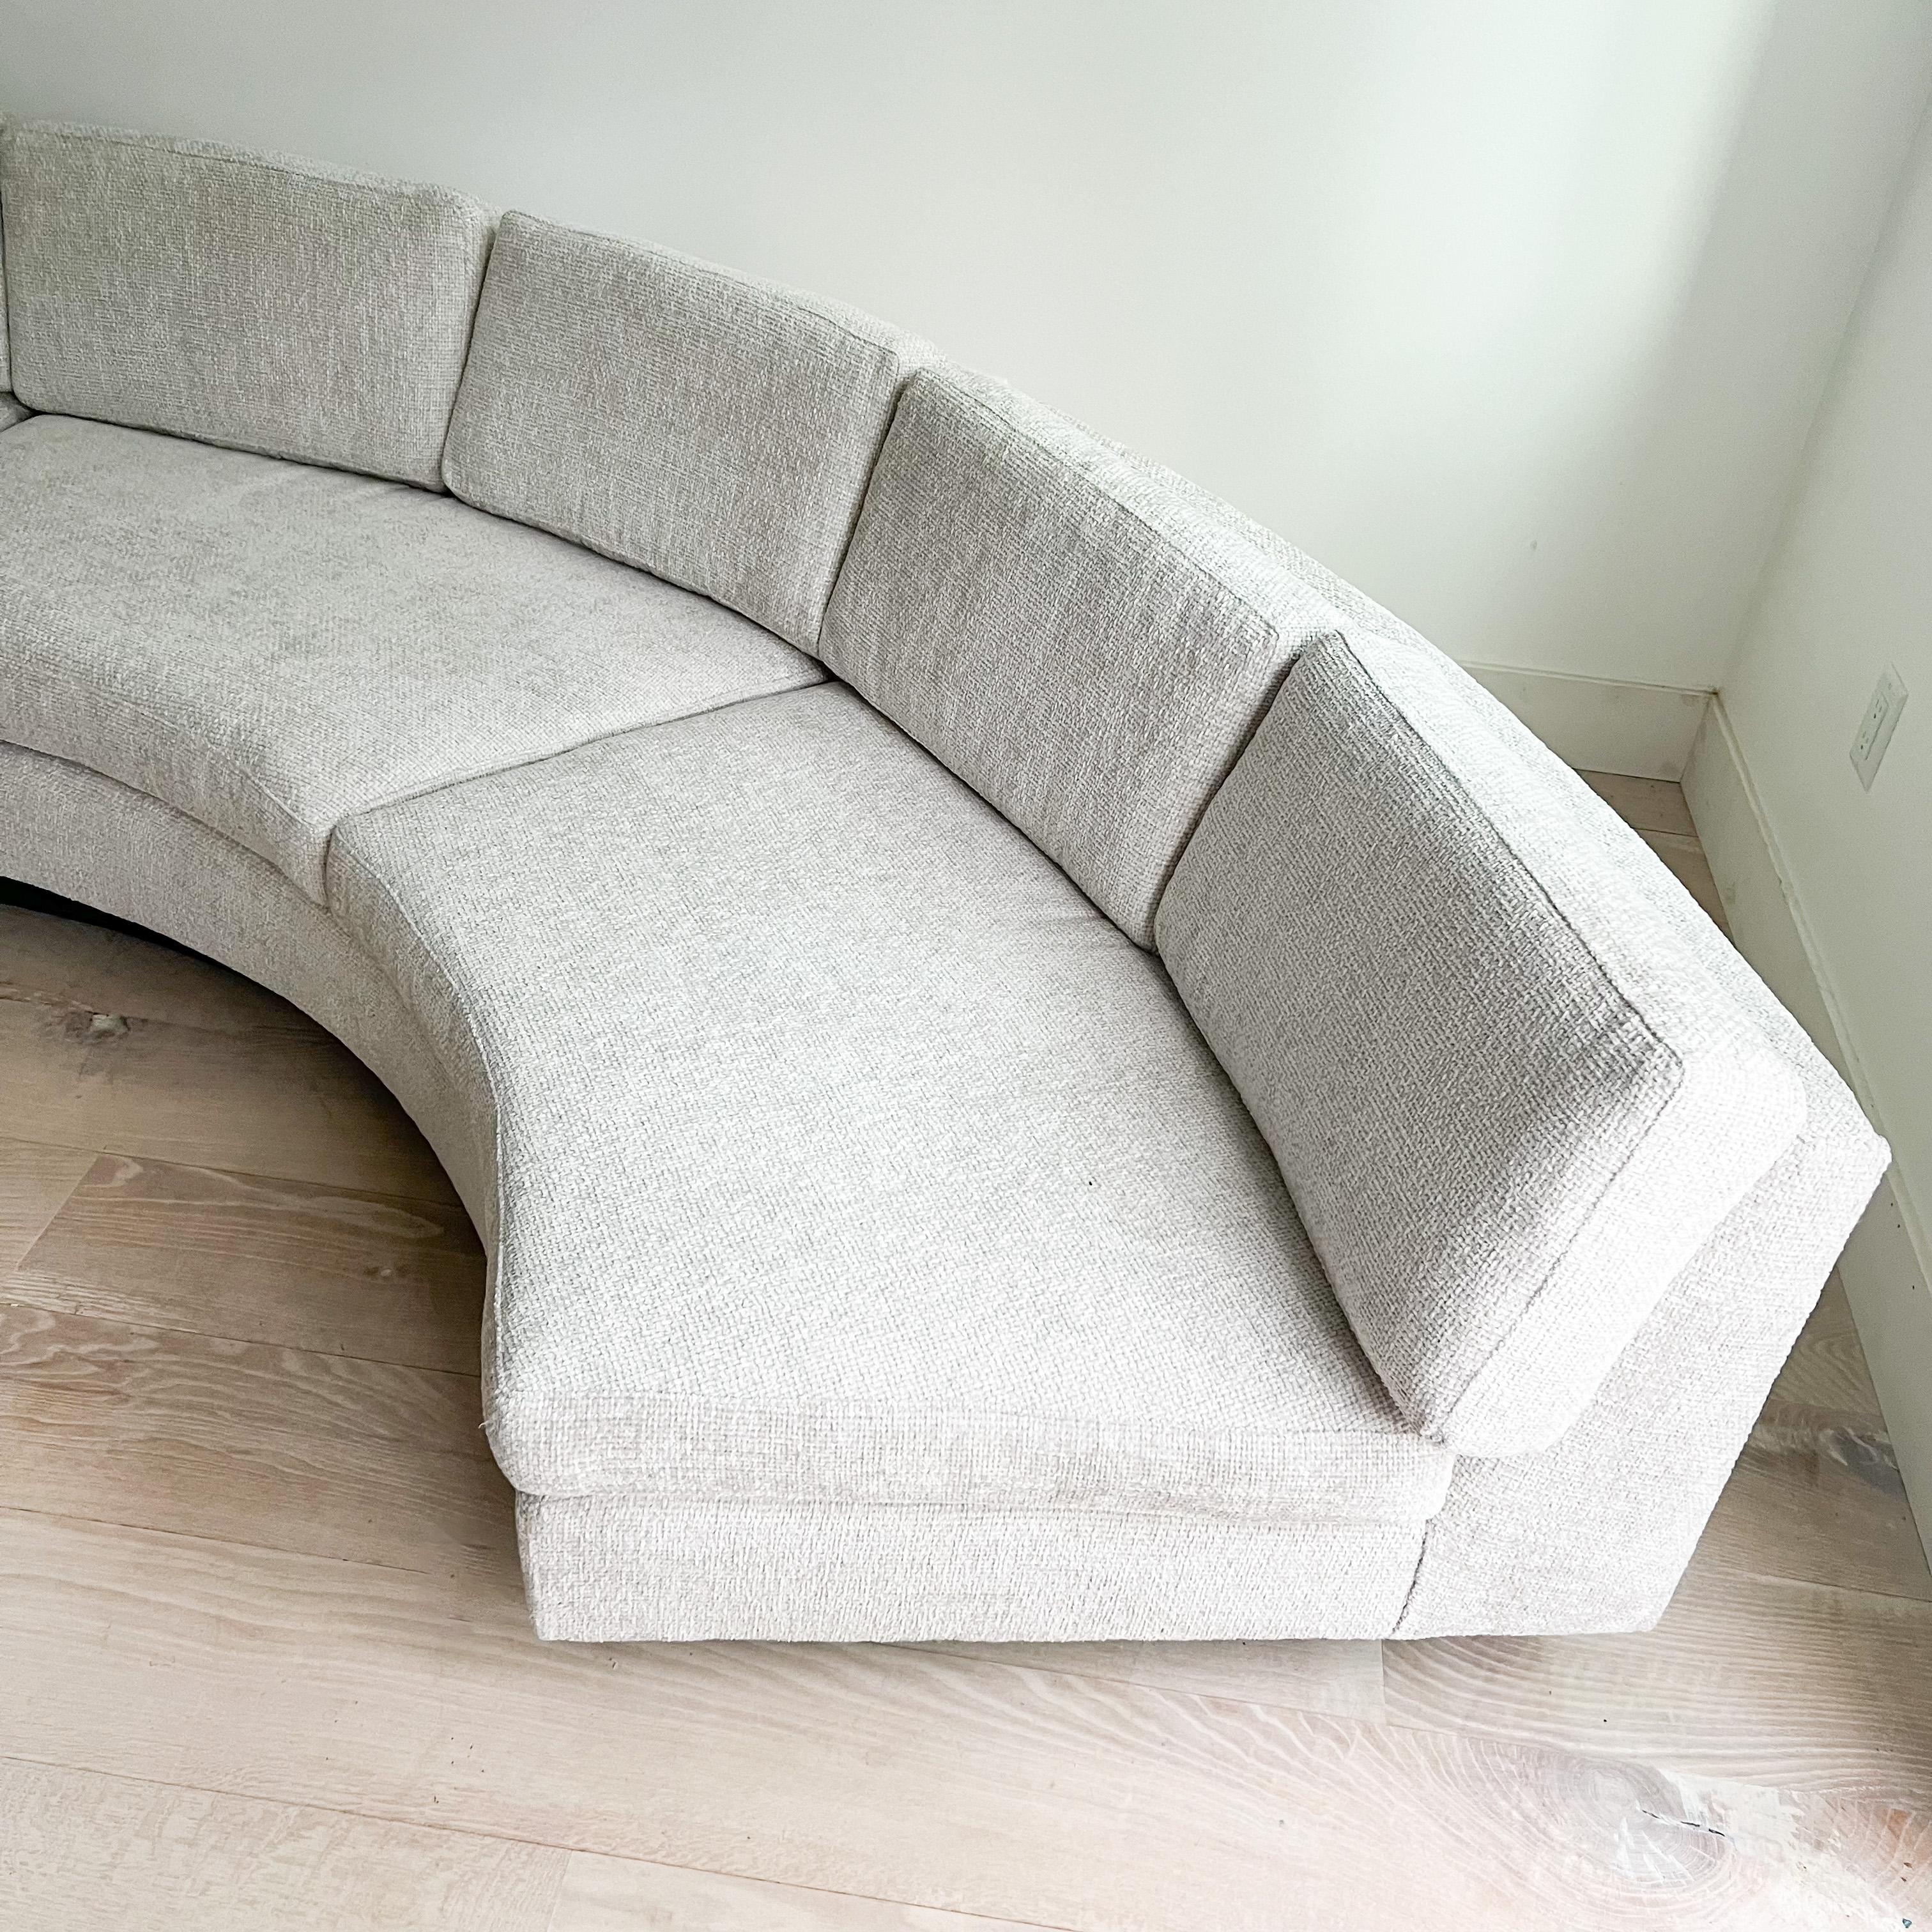 Mid-20th Century Mid Century Modern Semi-Circle Round Sectional Sofa - New Basketweave Upholstery